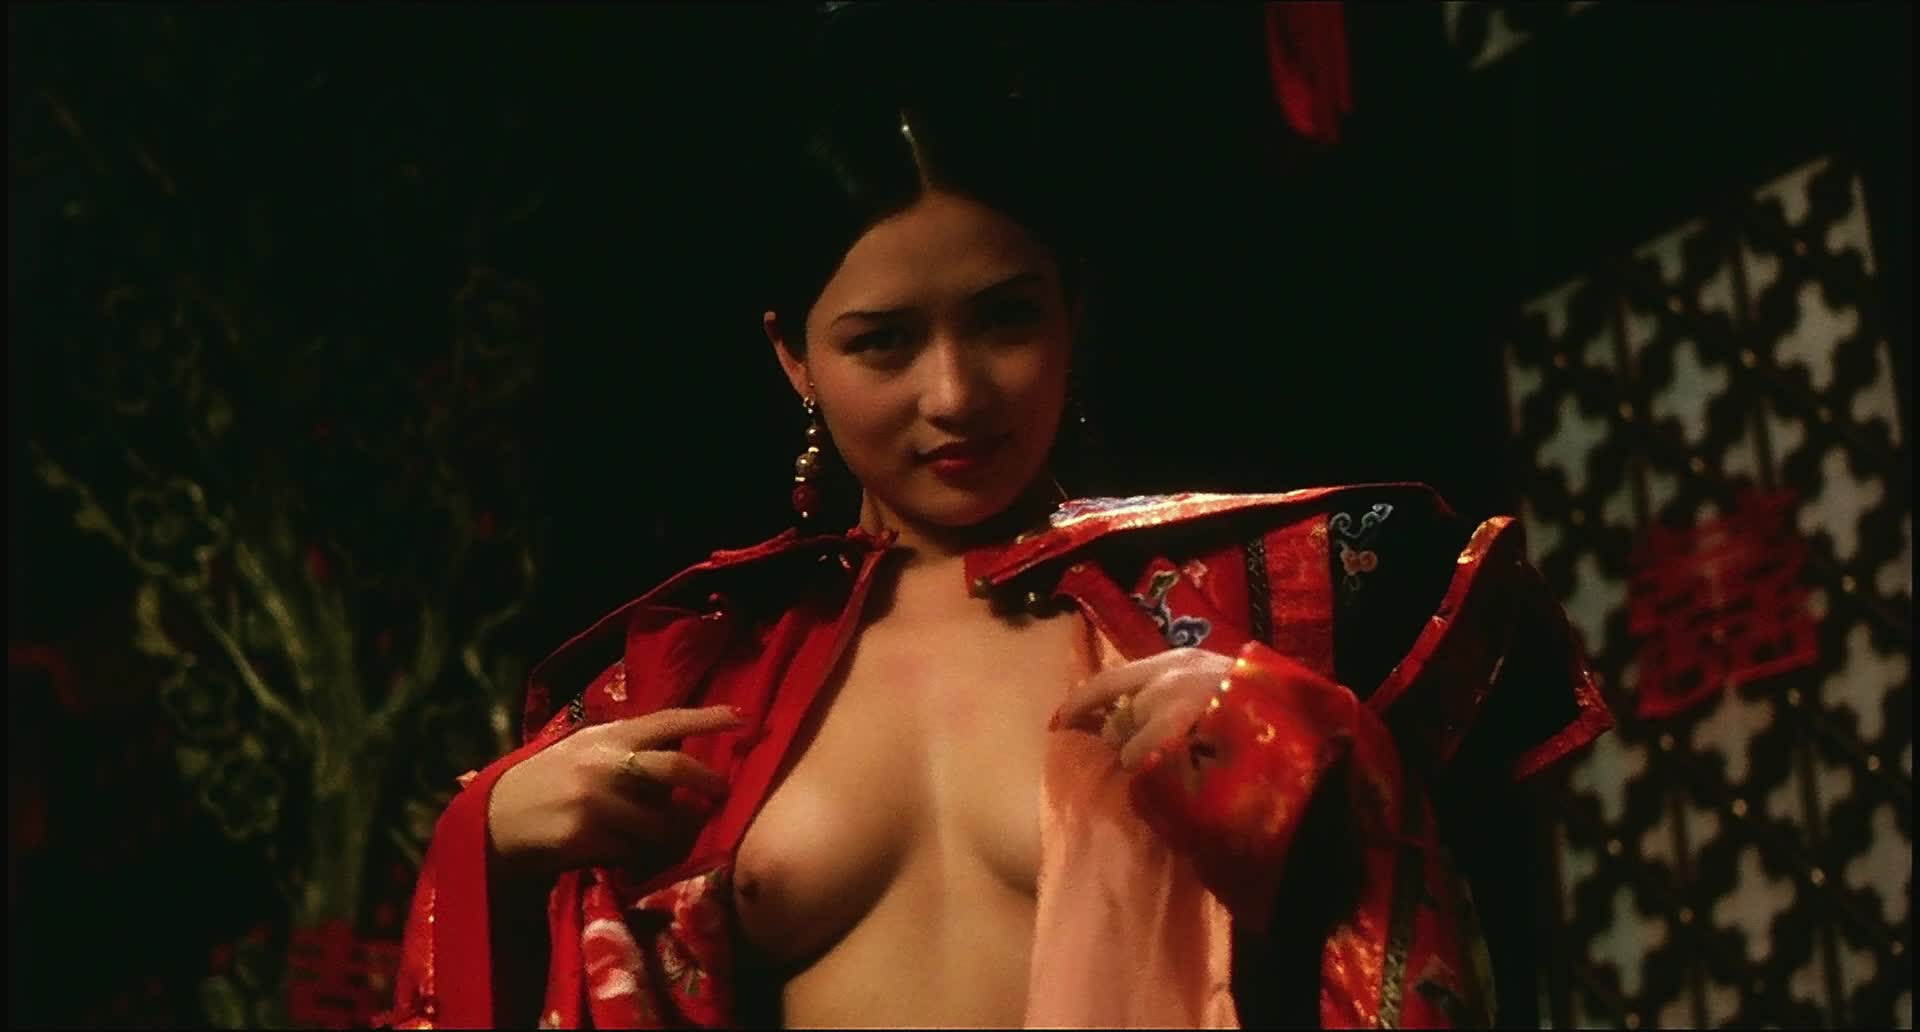 Секс и император / Man qing jin gong qi an / Sex and the emperor (1994) BDR...